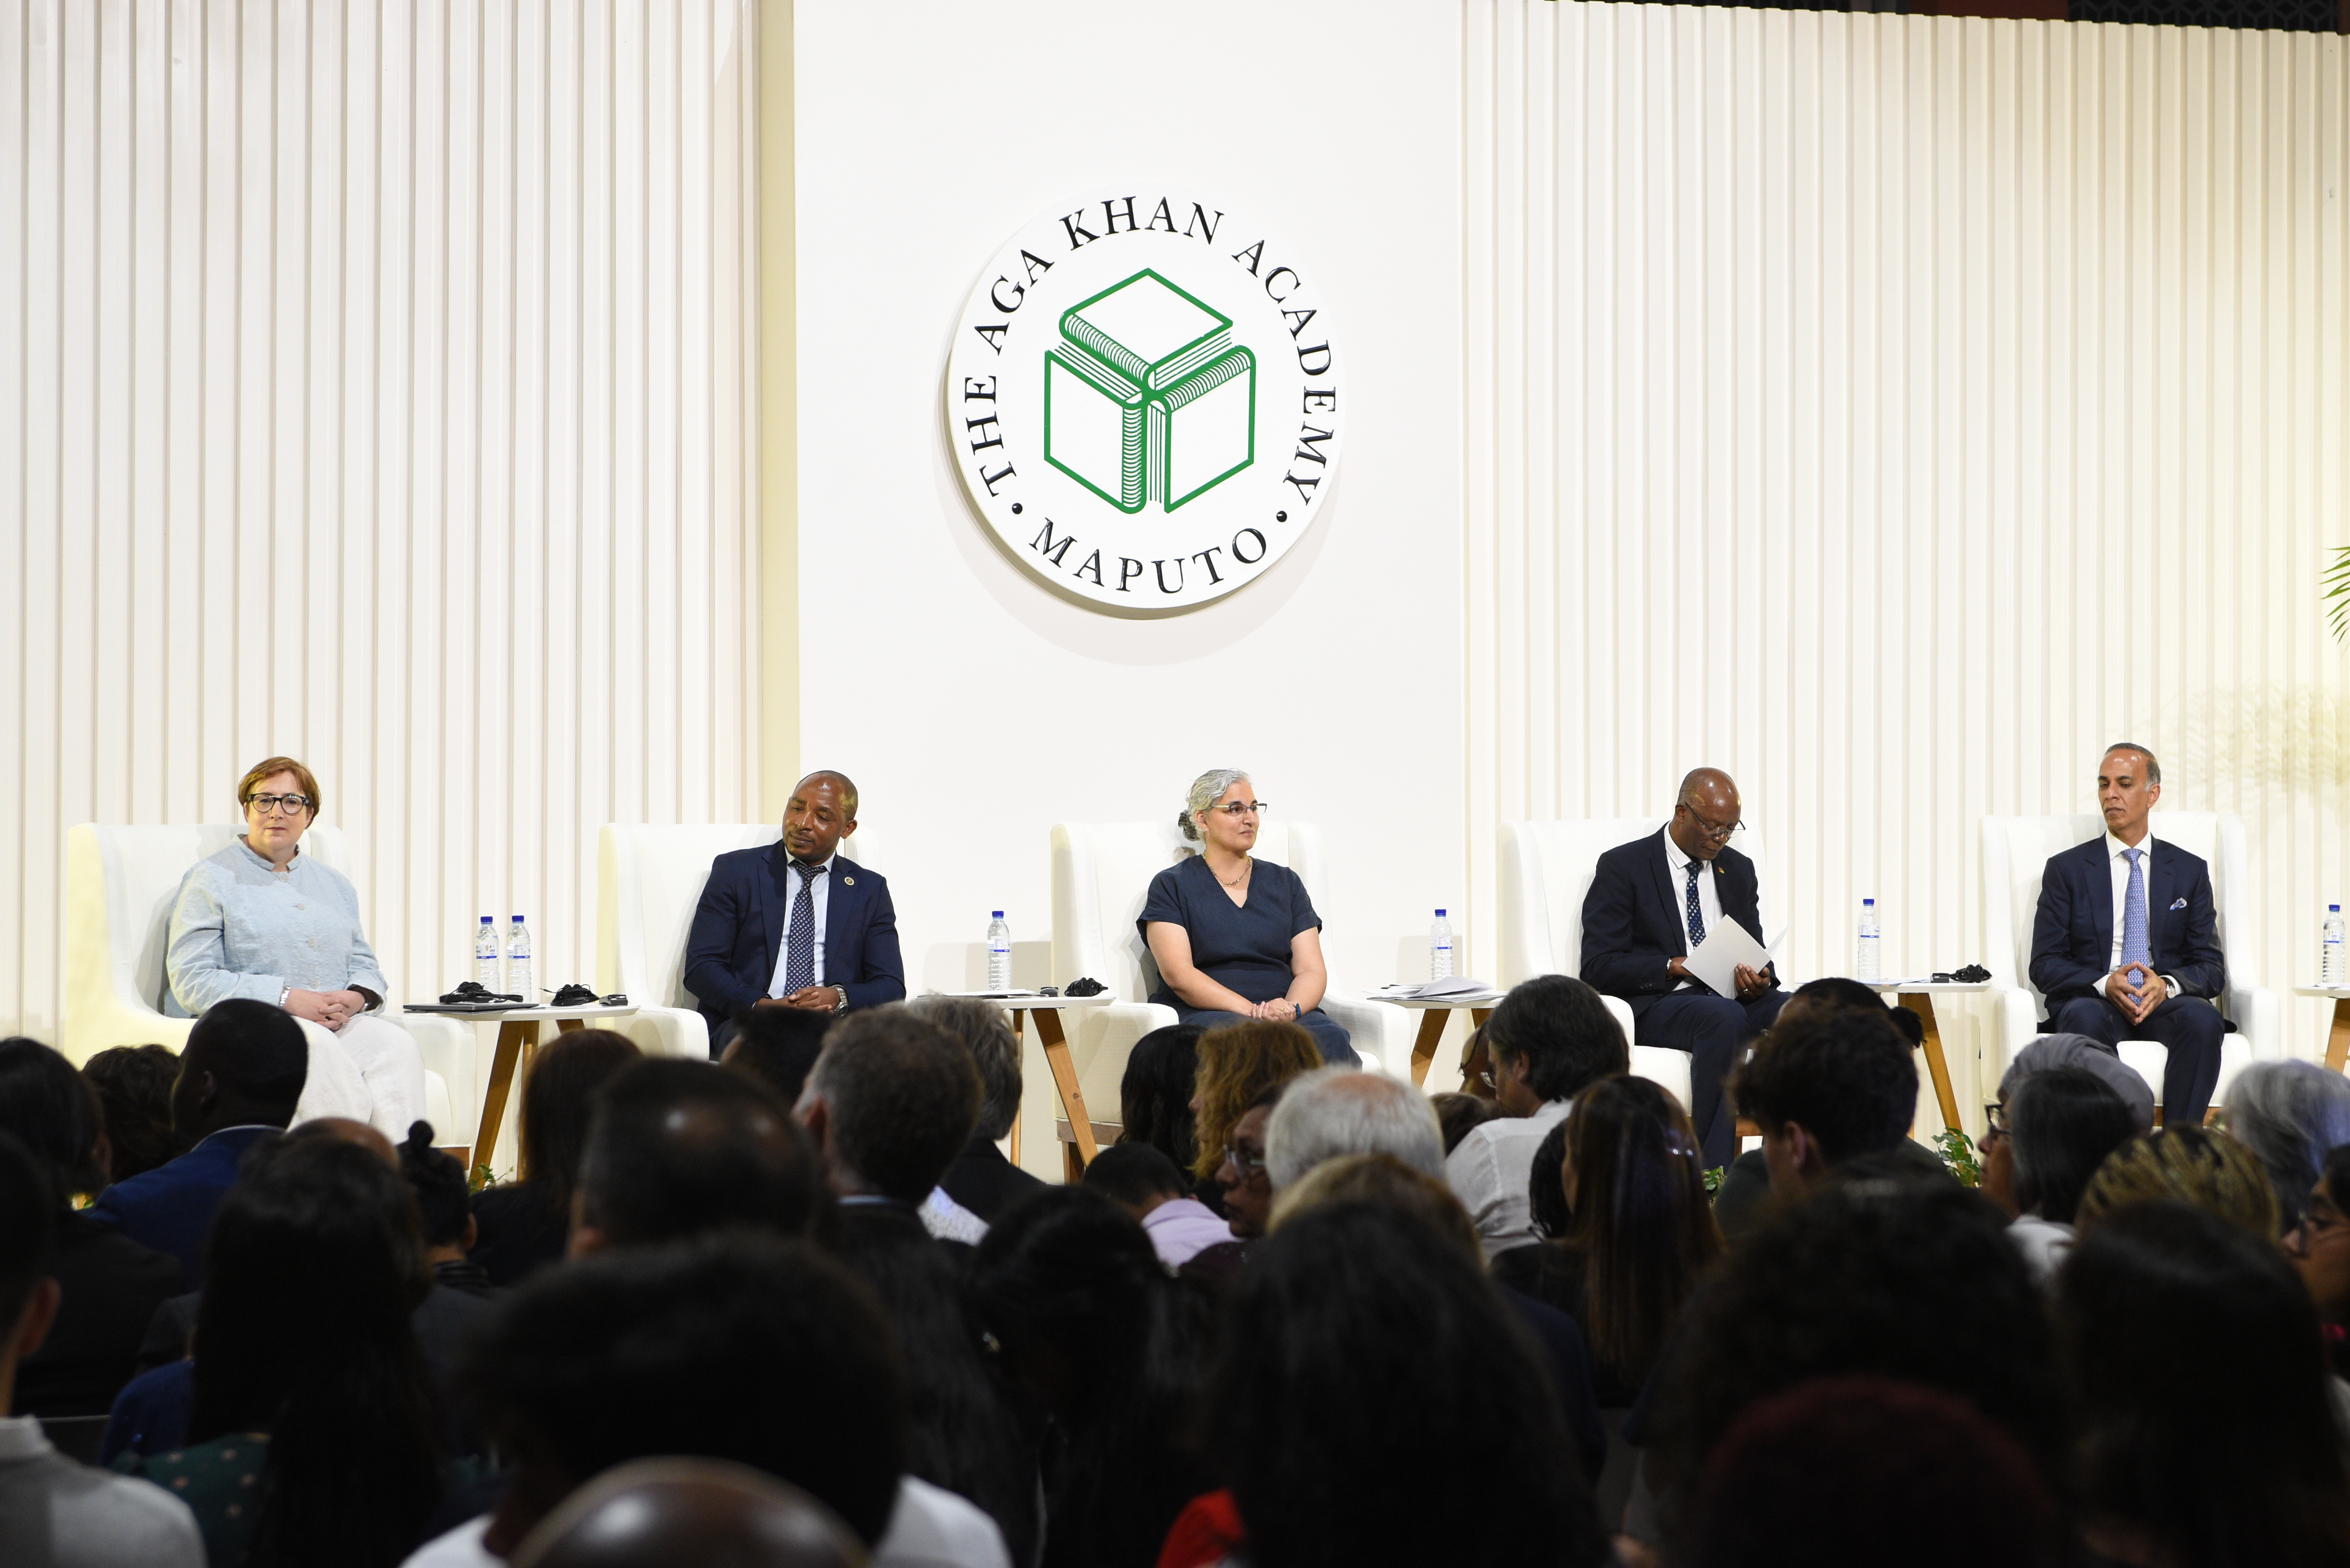 Speakers at the Academy’s graduation ceremony included (left to right), Academic Development Manager of the Aga Khan Schools Alexandra Holland; Senior School Principal Emmanuel Niyibizi; Head of Academy Andrea Spinner; Permanent Secretary for the Ministry